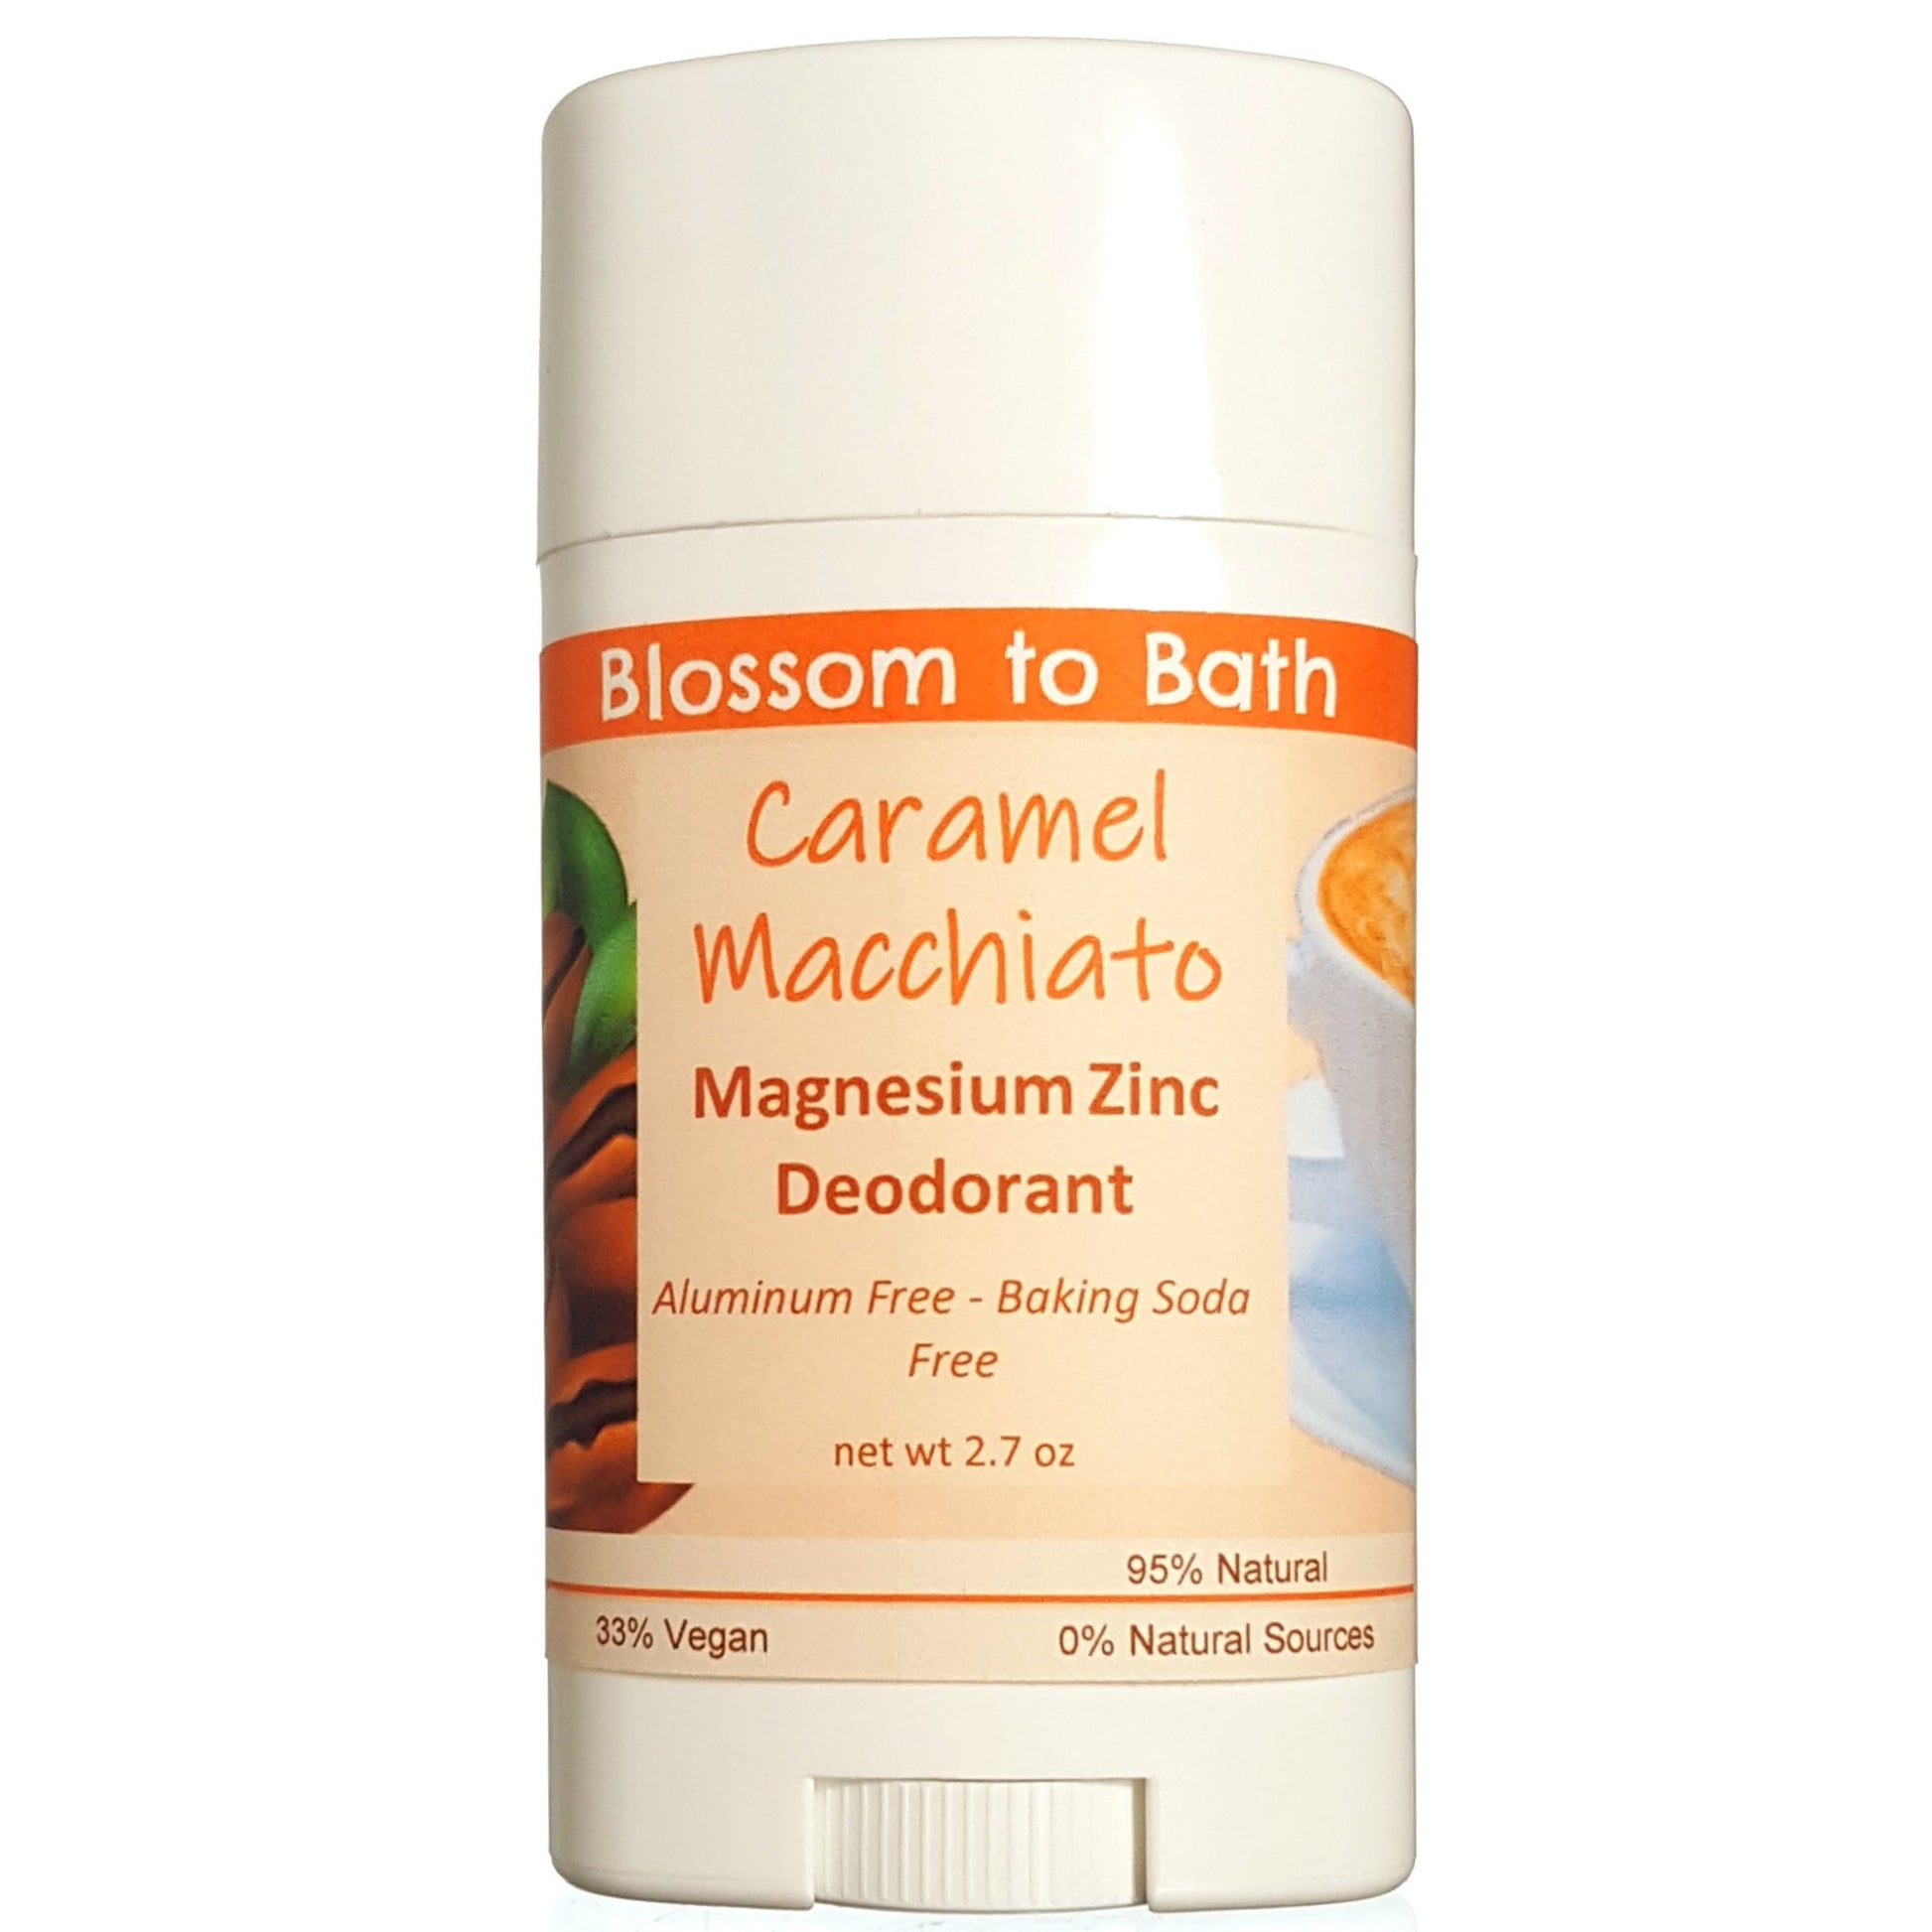 Buy Blossom to Bath Caramel Macchiato Magnesium Zinc Deodorant from Flowersong Soap Studio.  Long lasting protection made from organic botanicals and butters, made without baking soda, tested in the Arizona heat  Luscious vanilla and warm rich caramel - a gourmet coffee experience with sweet caramel in a bed of vibrant coffee;